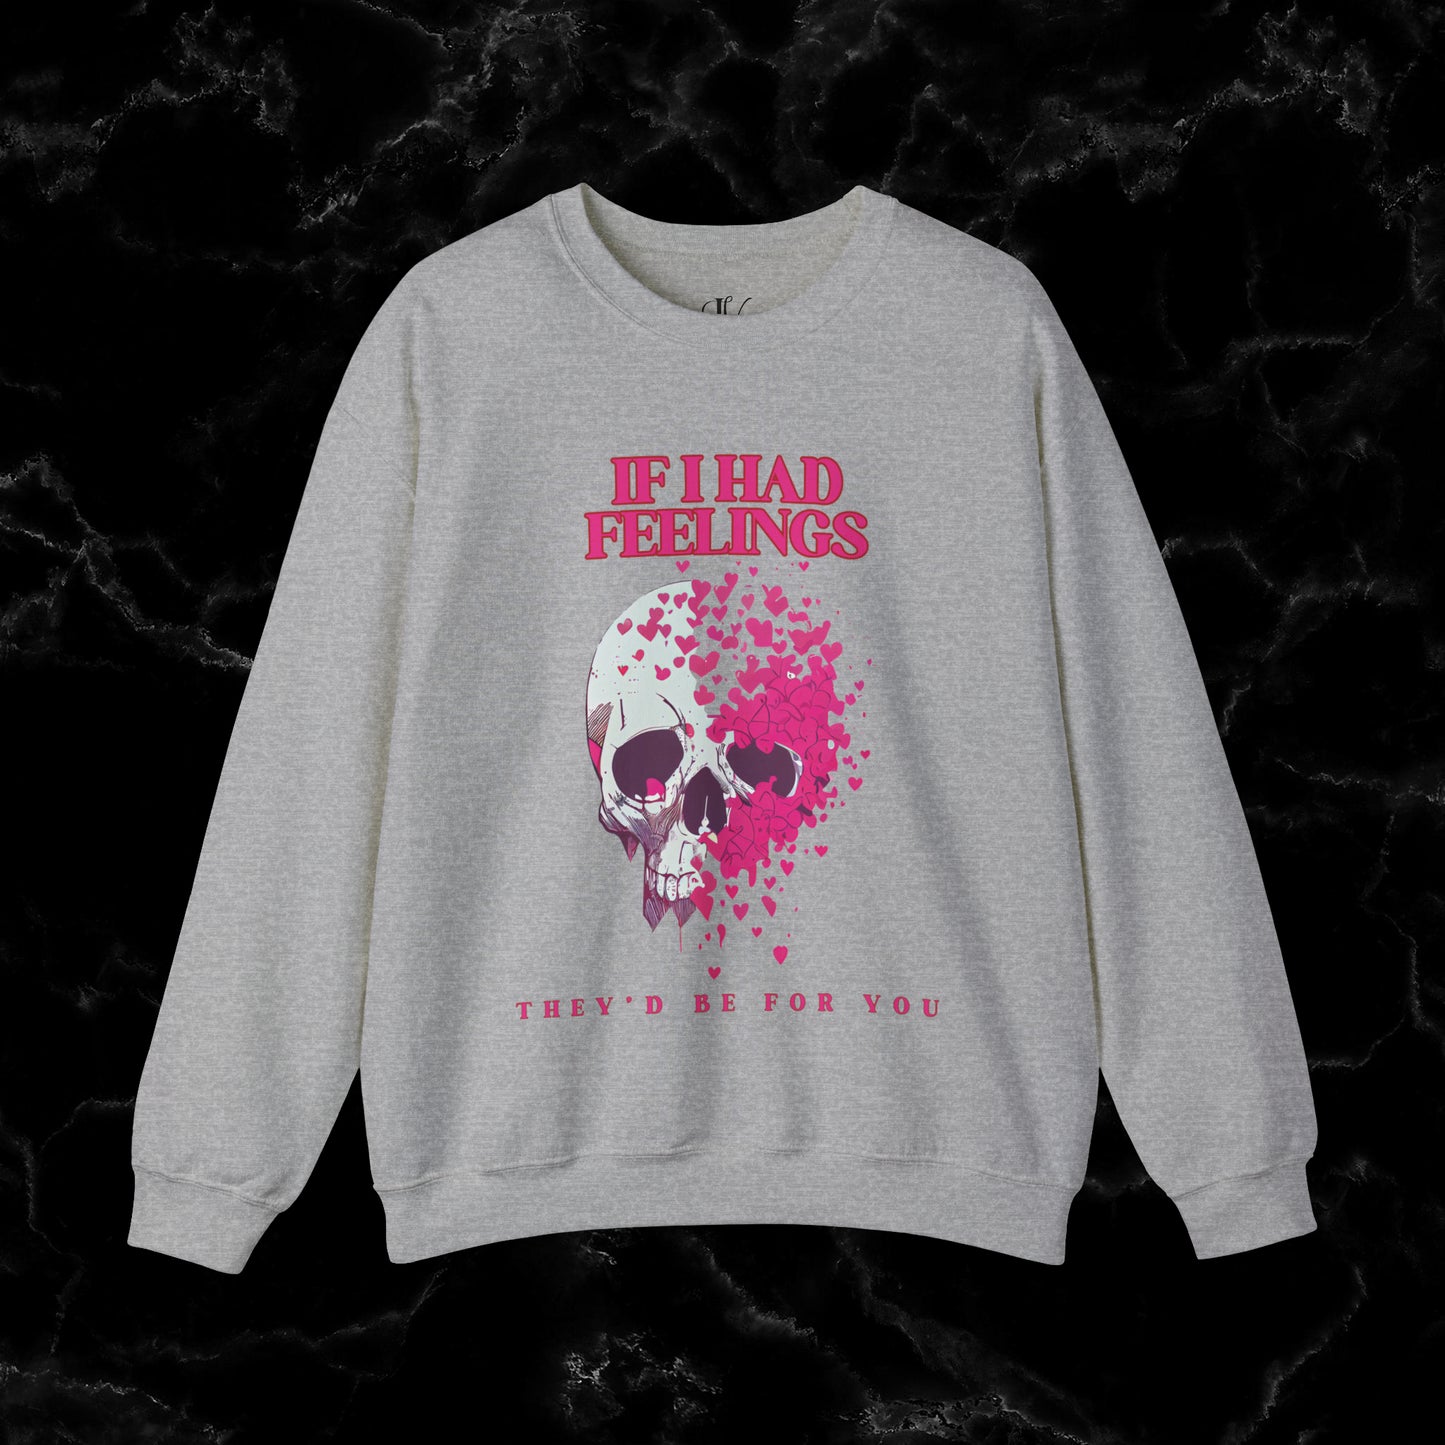 If I Had Feelings, They'd Be For You Sweatshirt - Skeleton Valentines Sweatshirt - Funny Valentines Sweater - Women's Valentines - Valentines Gift Sweatshirt S Sport Grey 